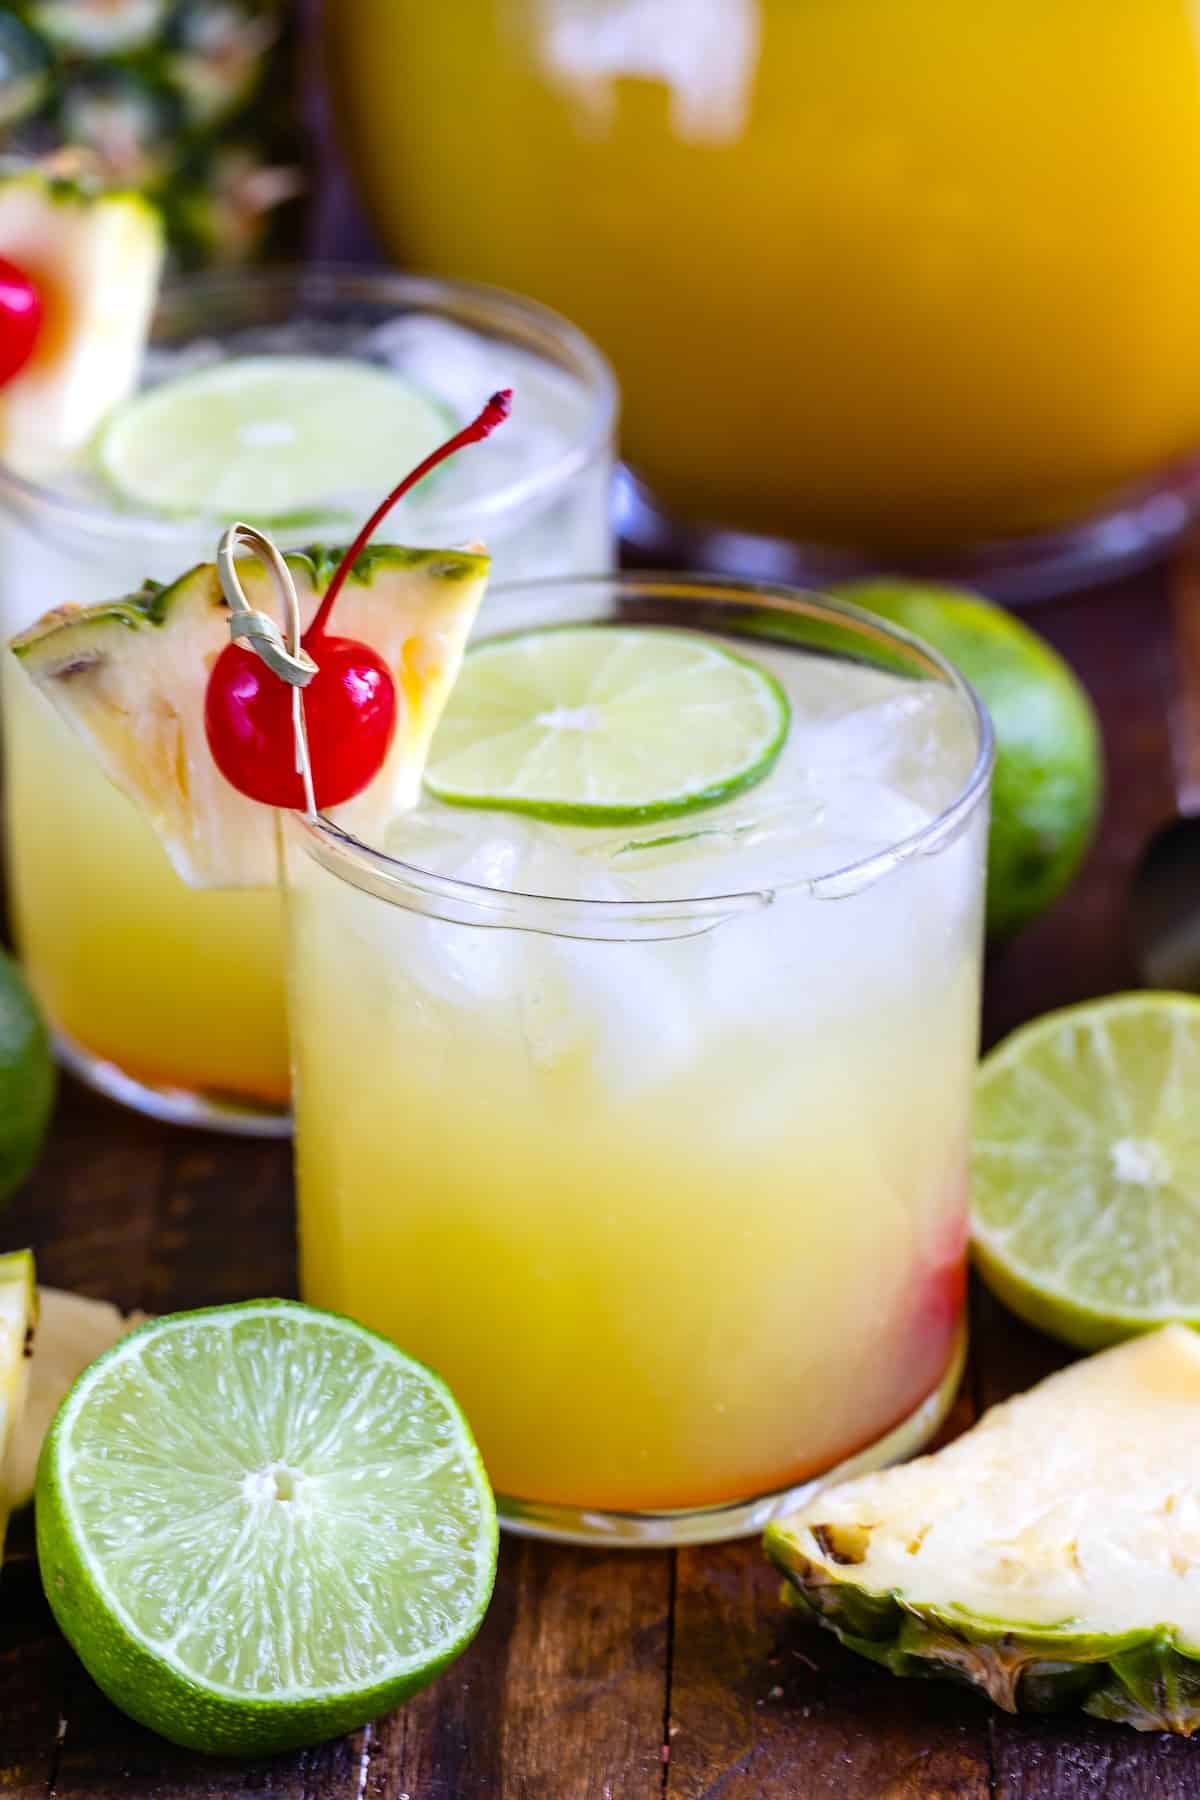 yellow drink in a short clear glass with cherries and pineapple slices and limes on the rim.